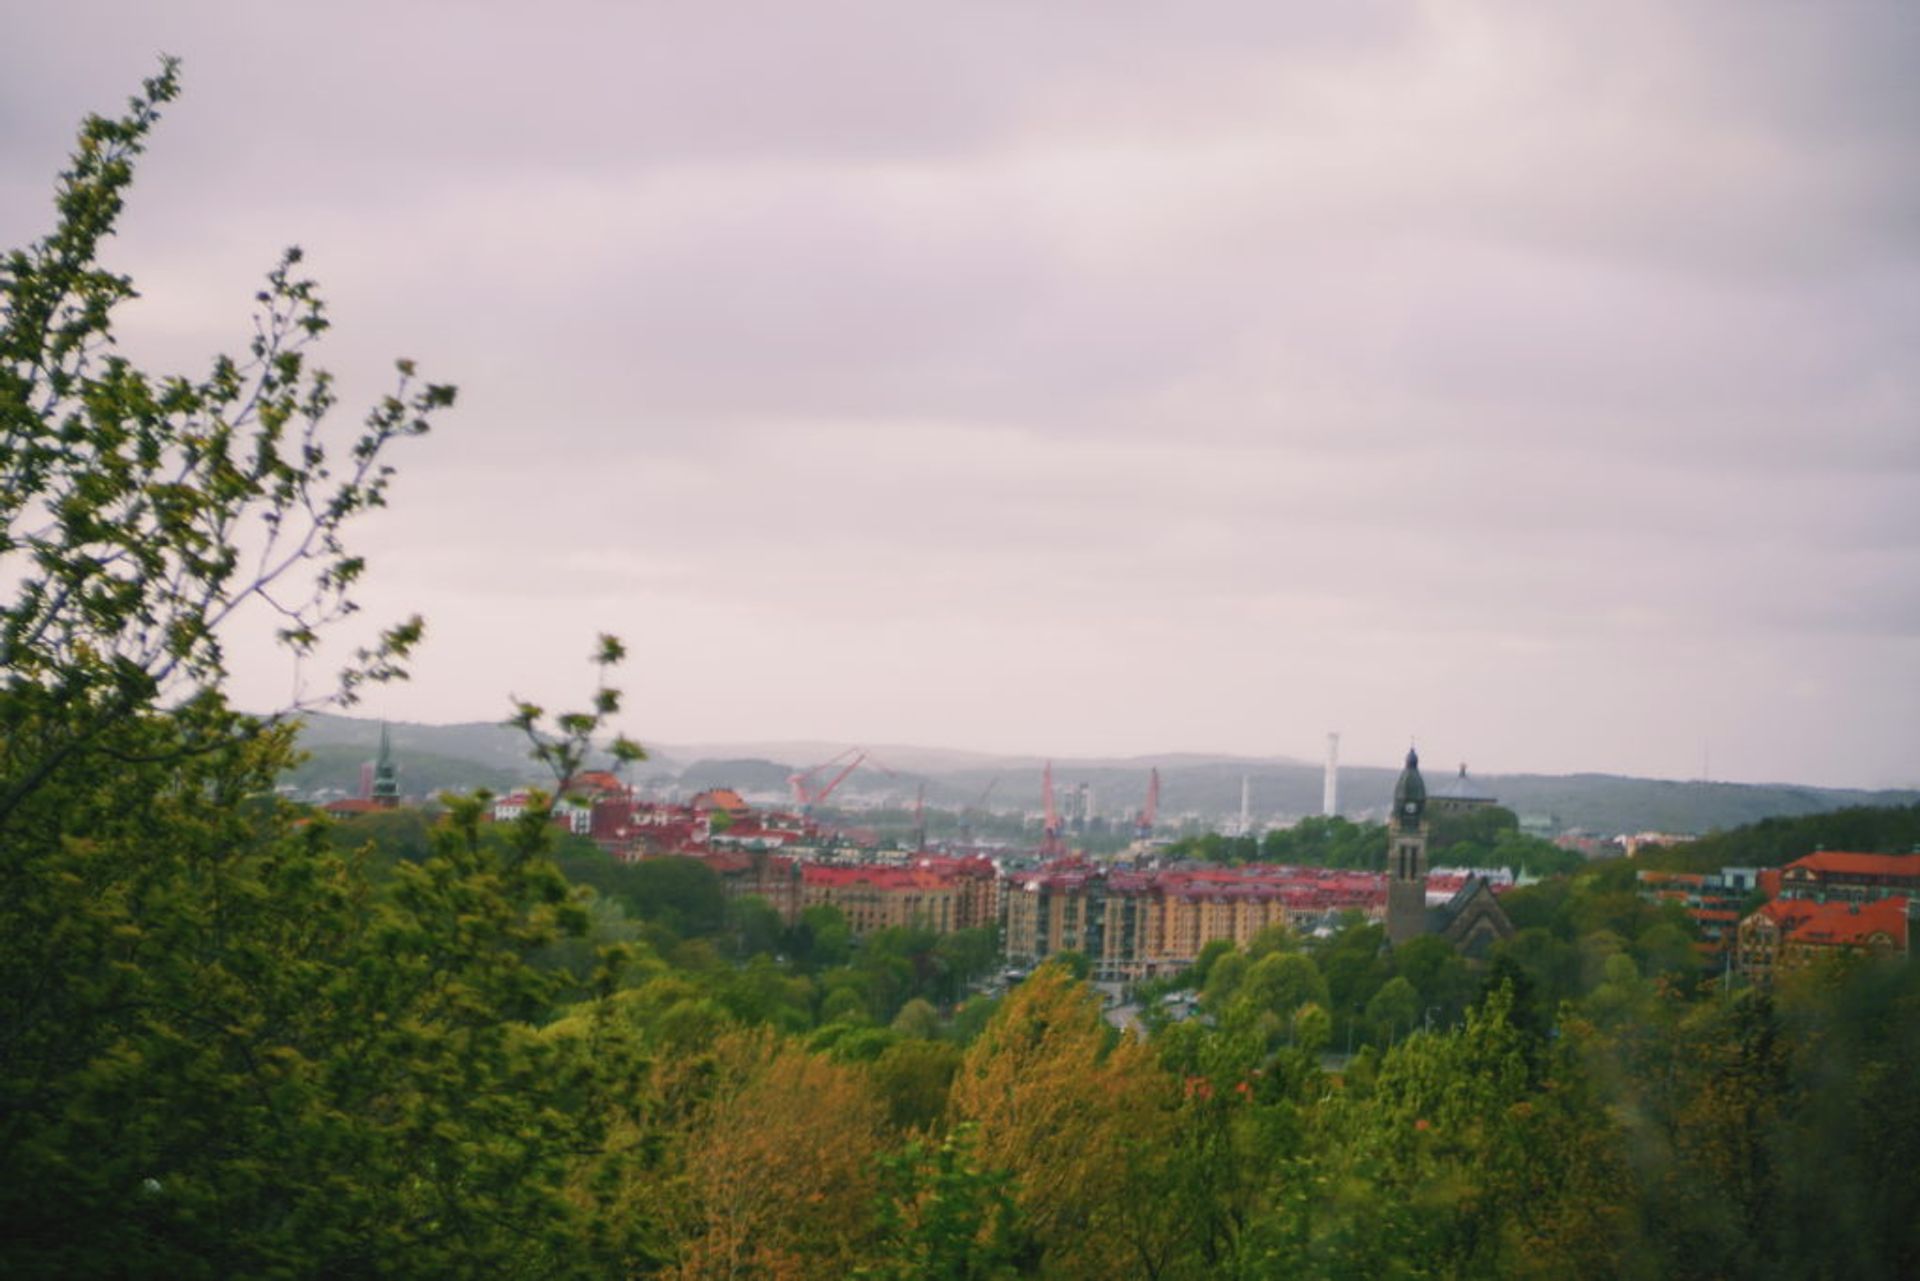 Gothenburg from a distance.